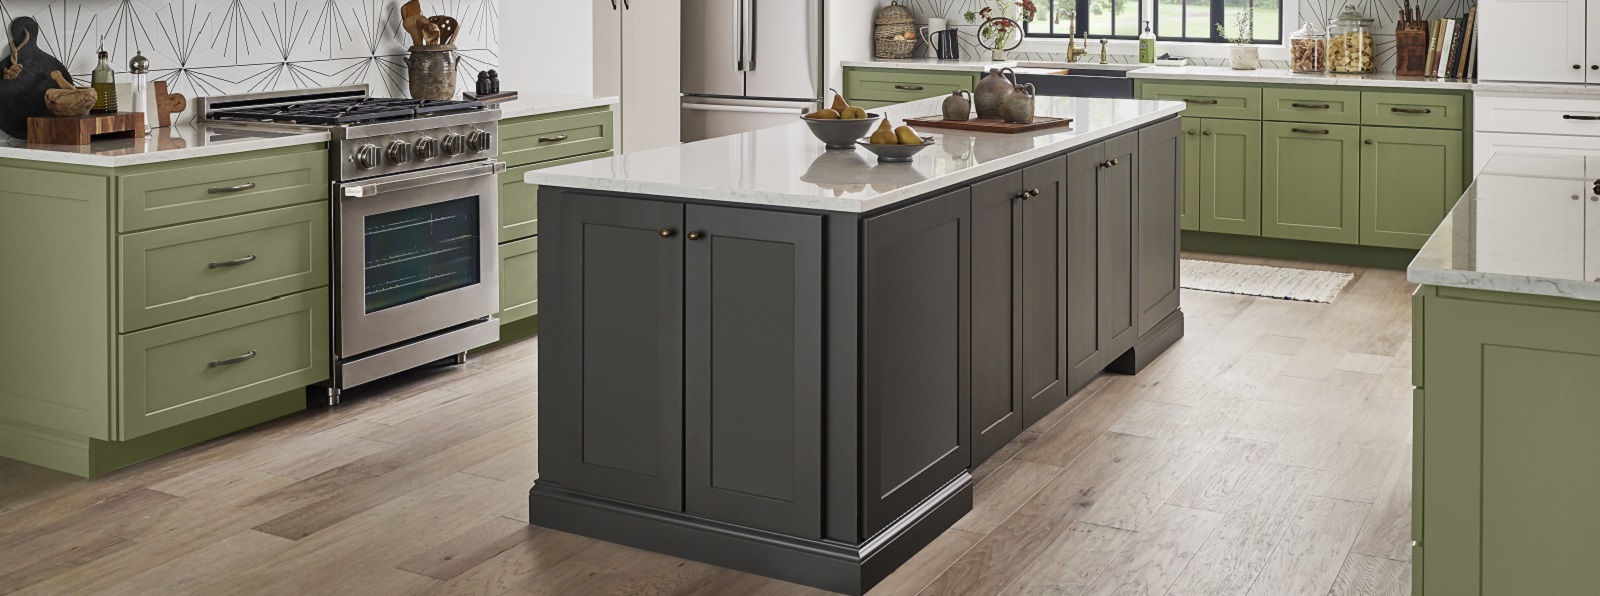 Home - Dash Cabinetry